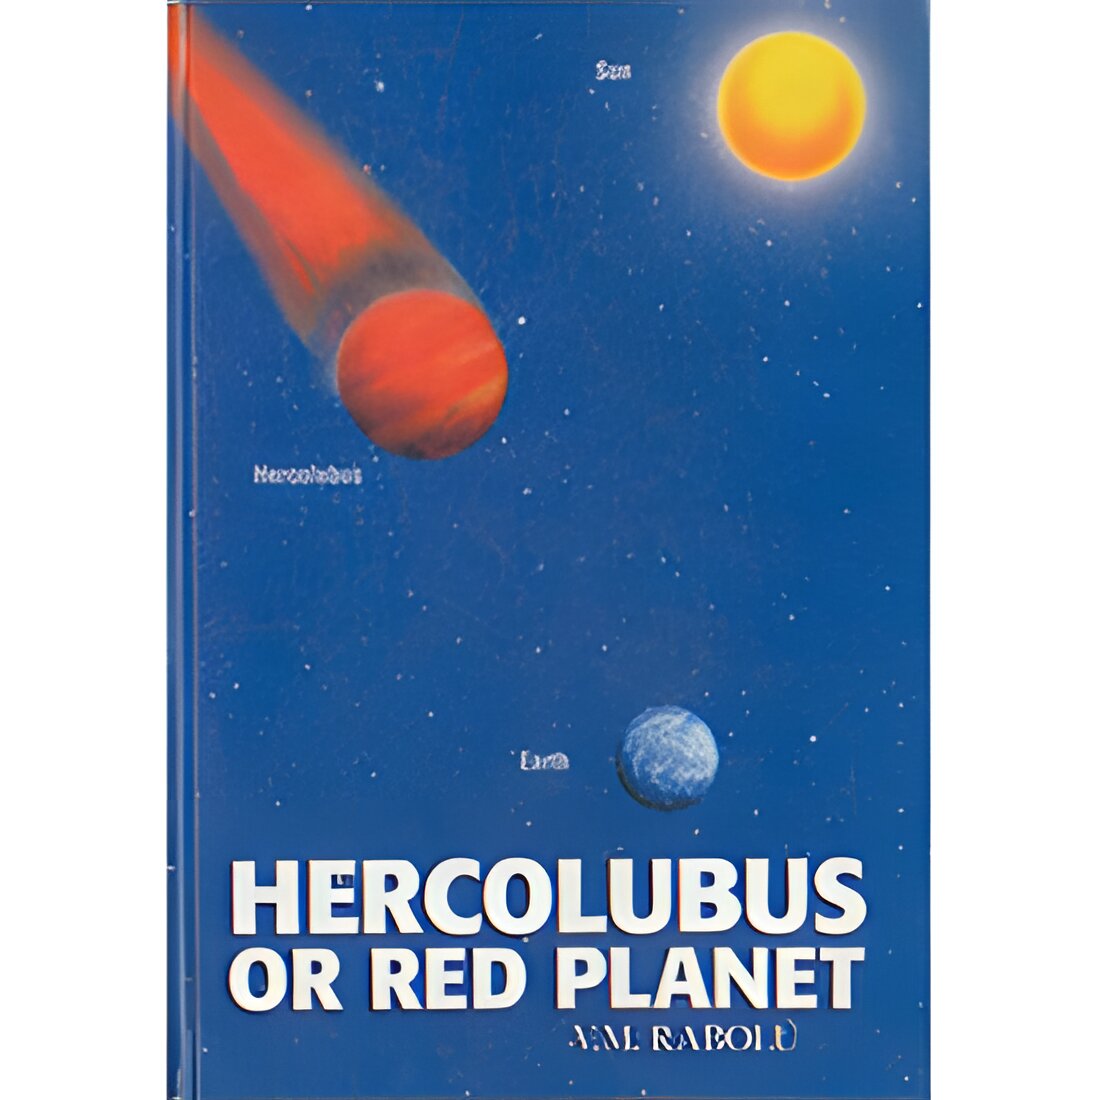 Free Book "Hercolubus or Red planet"